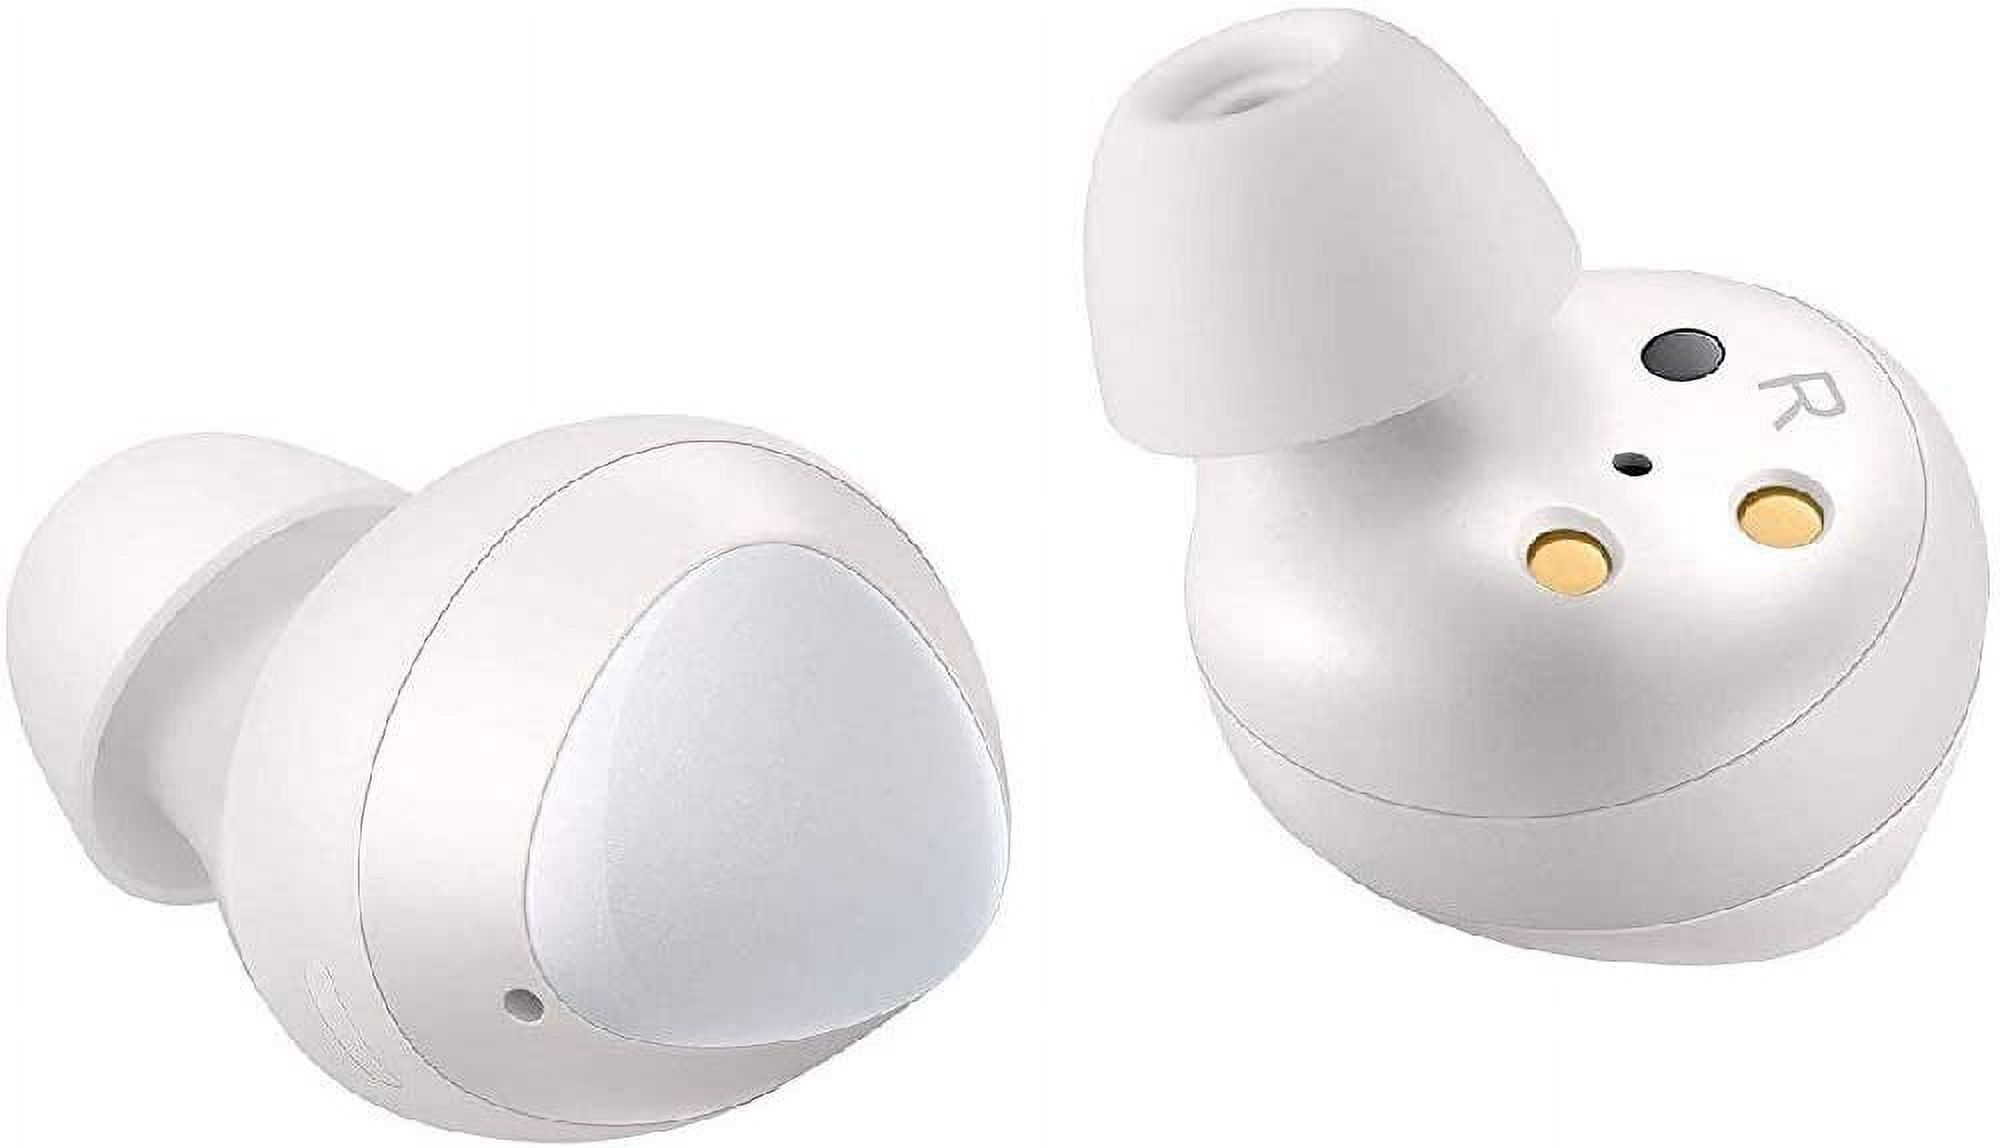 SAMSUNG Galaxy Buds, White (Charging Case Included) - image 1 of 17